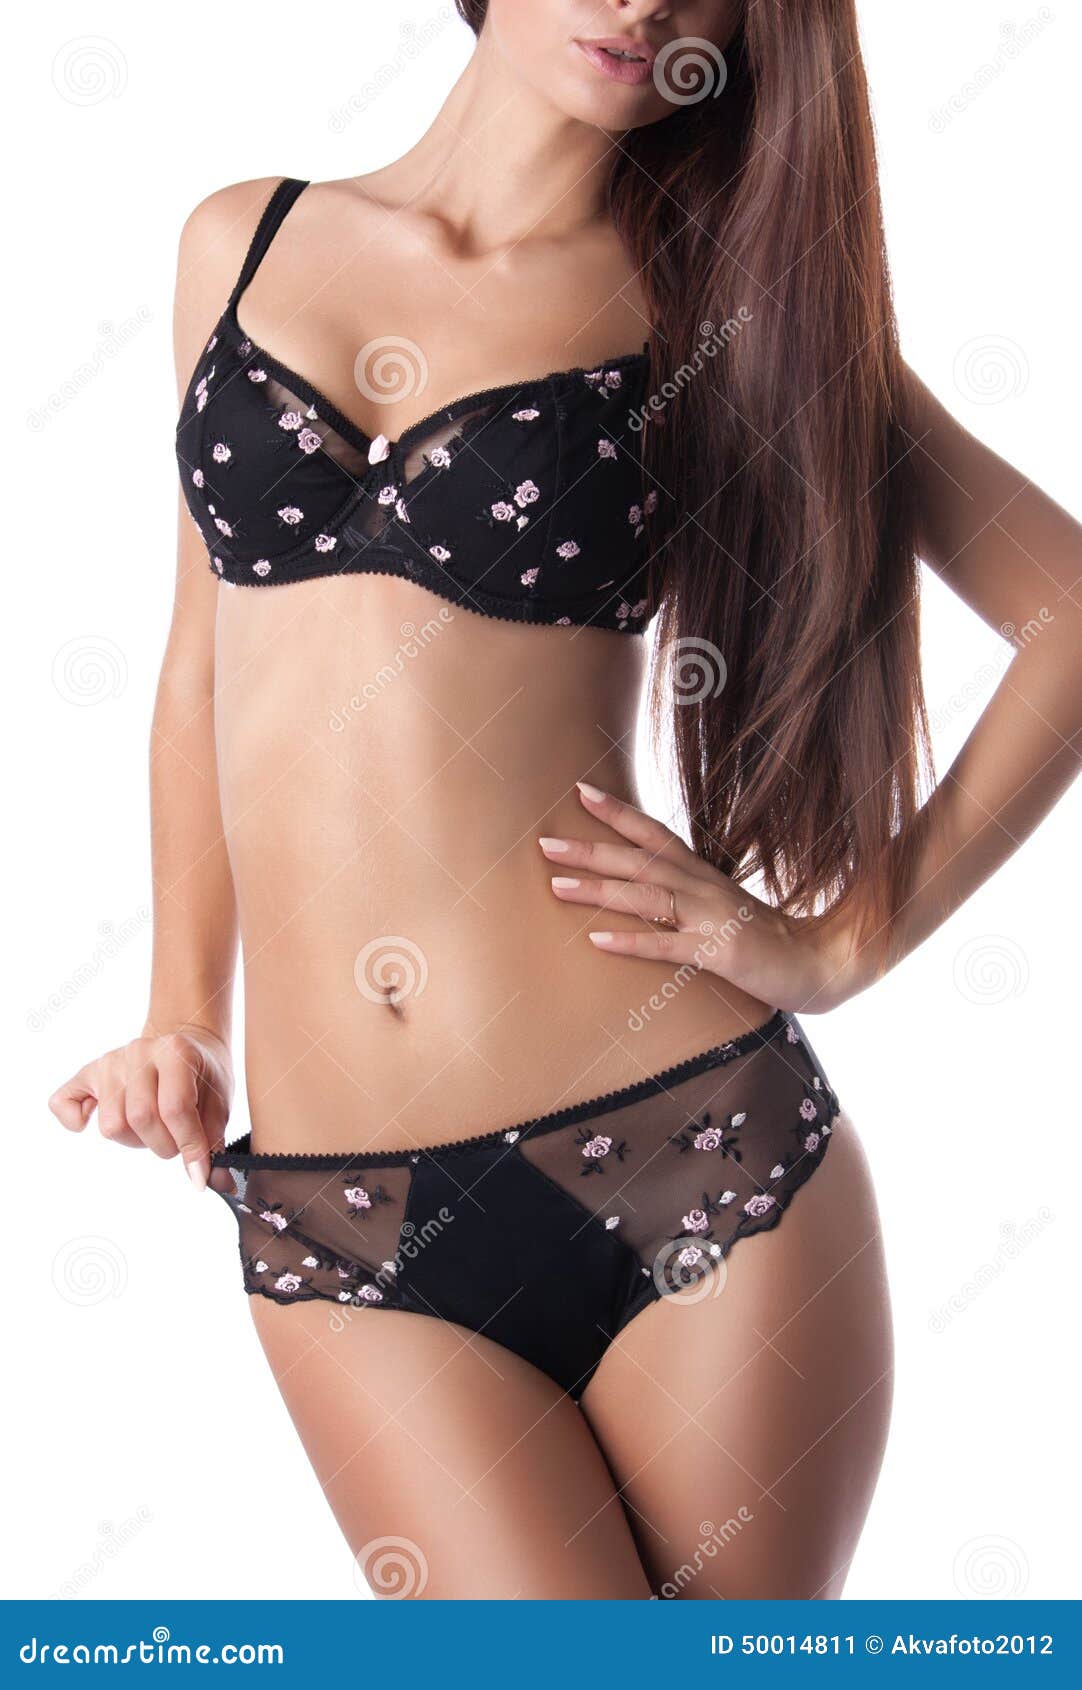 Female Body Part With Panties Stock Image - Image of ...